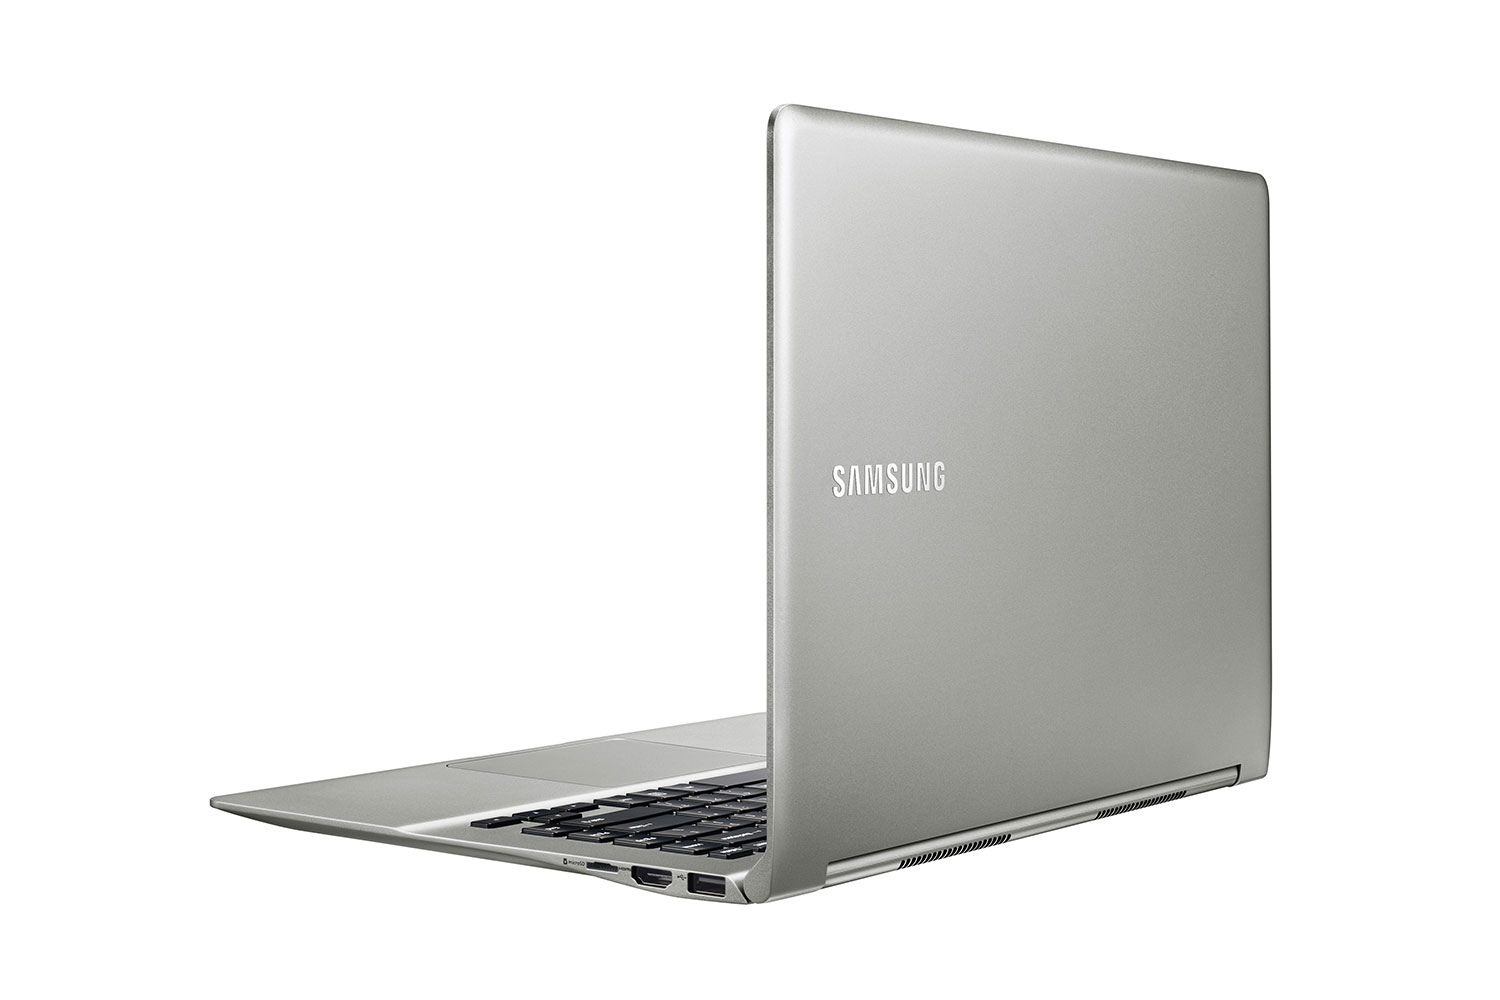 samsung debuts new galaxy tabpro s 2 in 1 book 9 laptops at ces 2016 15 4